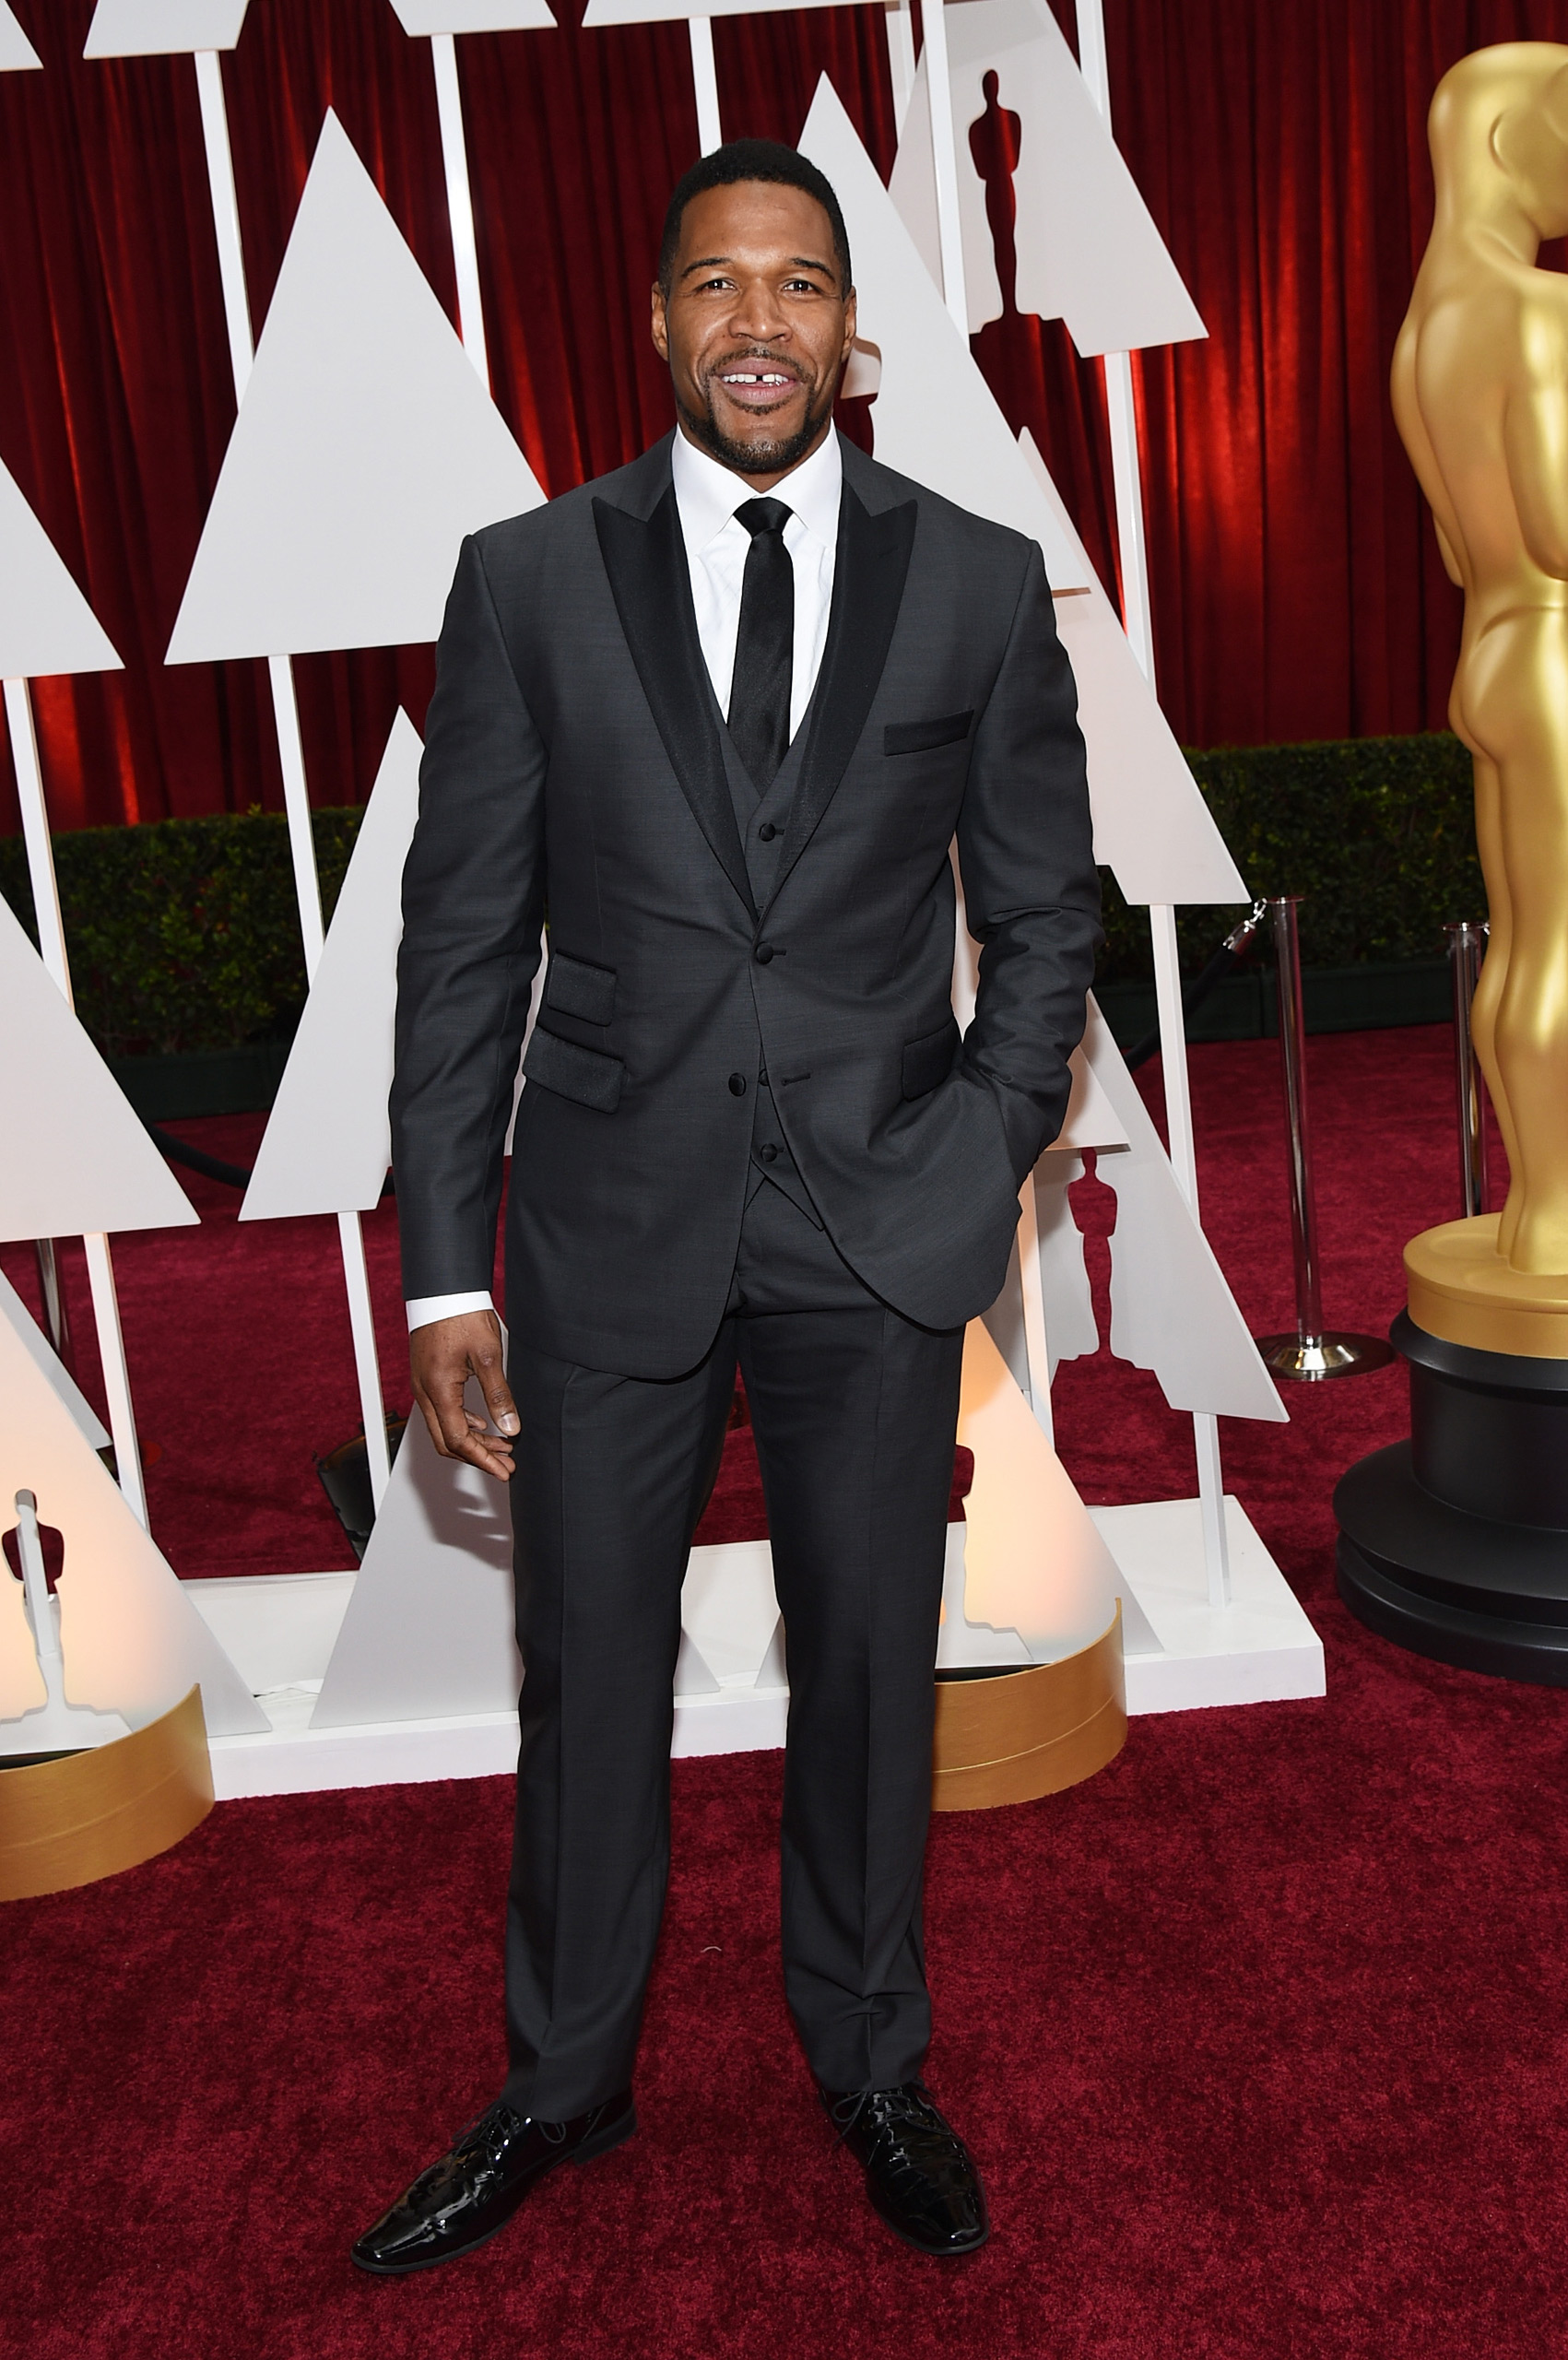 Michael Strahan attends the 87th Annual Academy Awards on Feb. 22, 2015 in Hollywood, Calif.